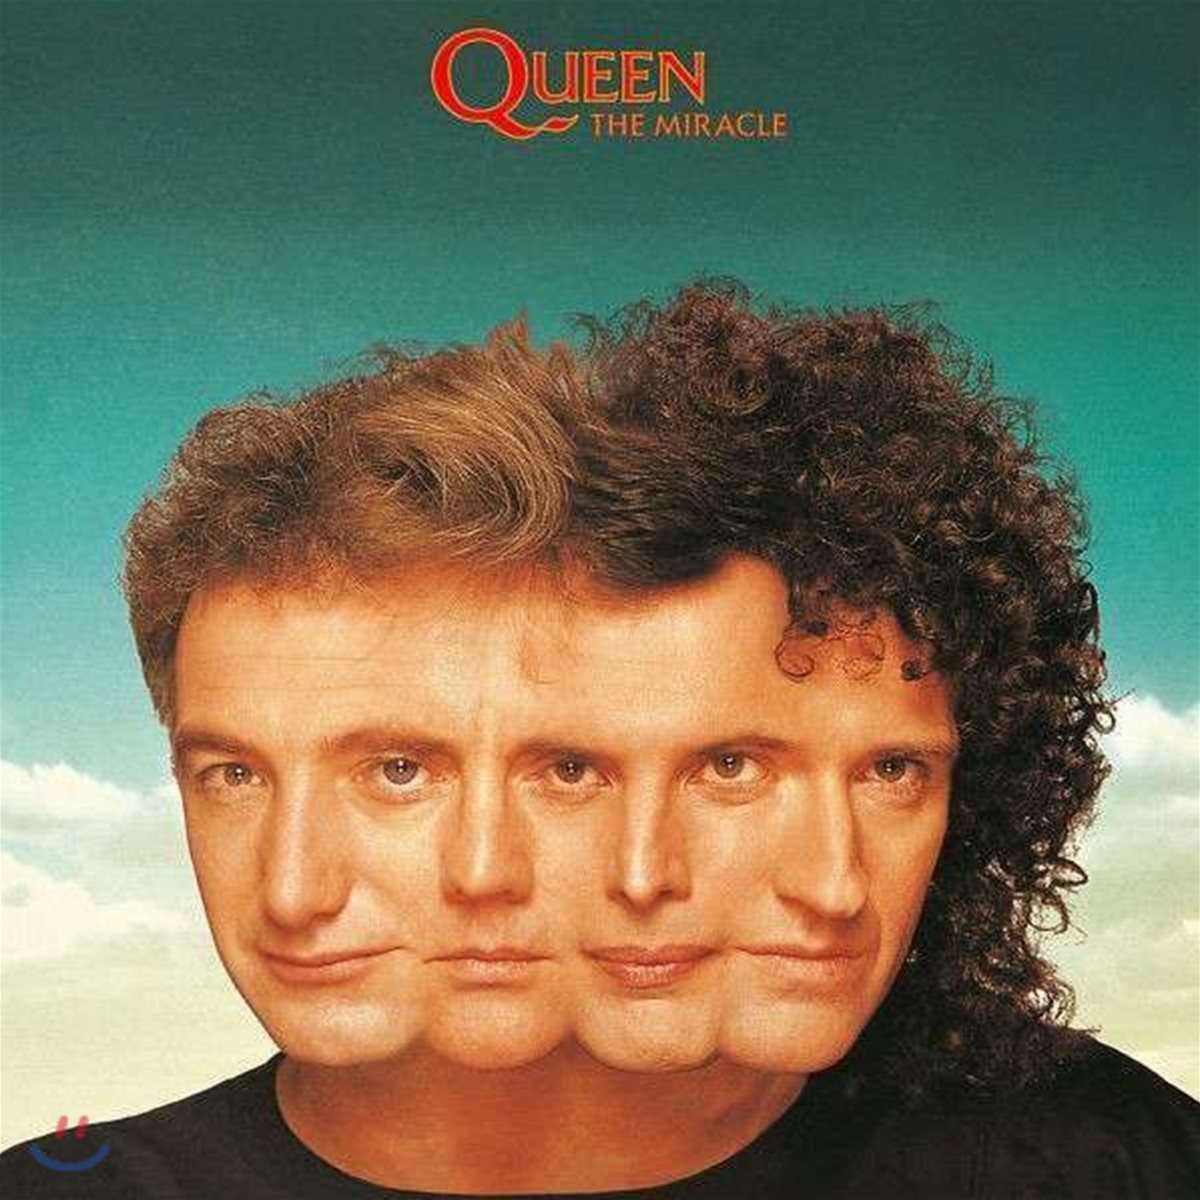 Queen - The Miracle 퀸 13집